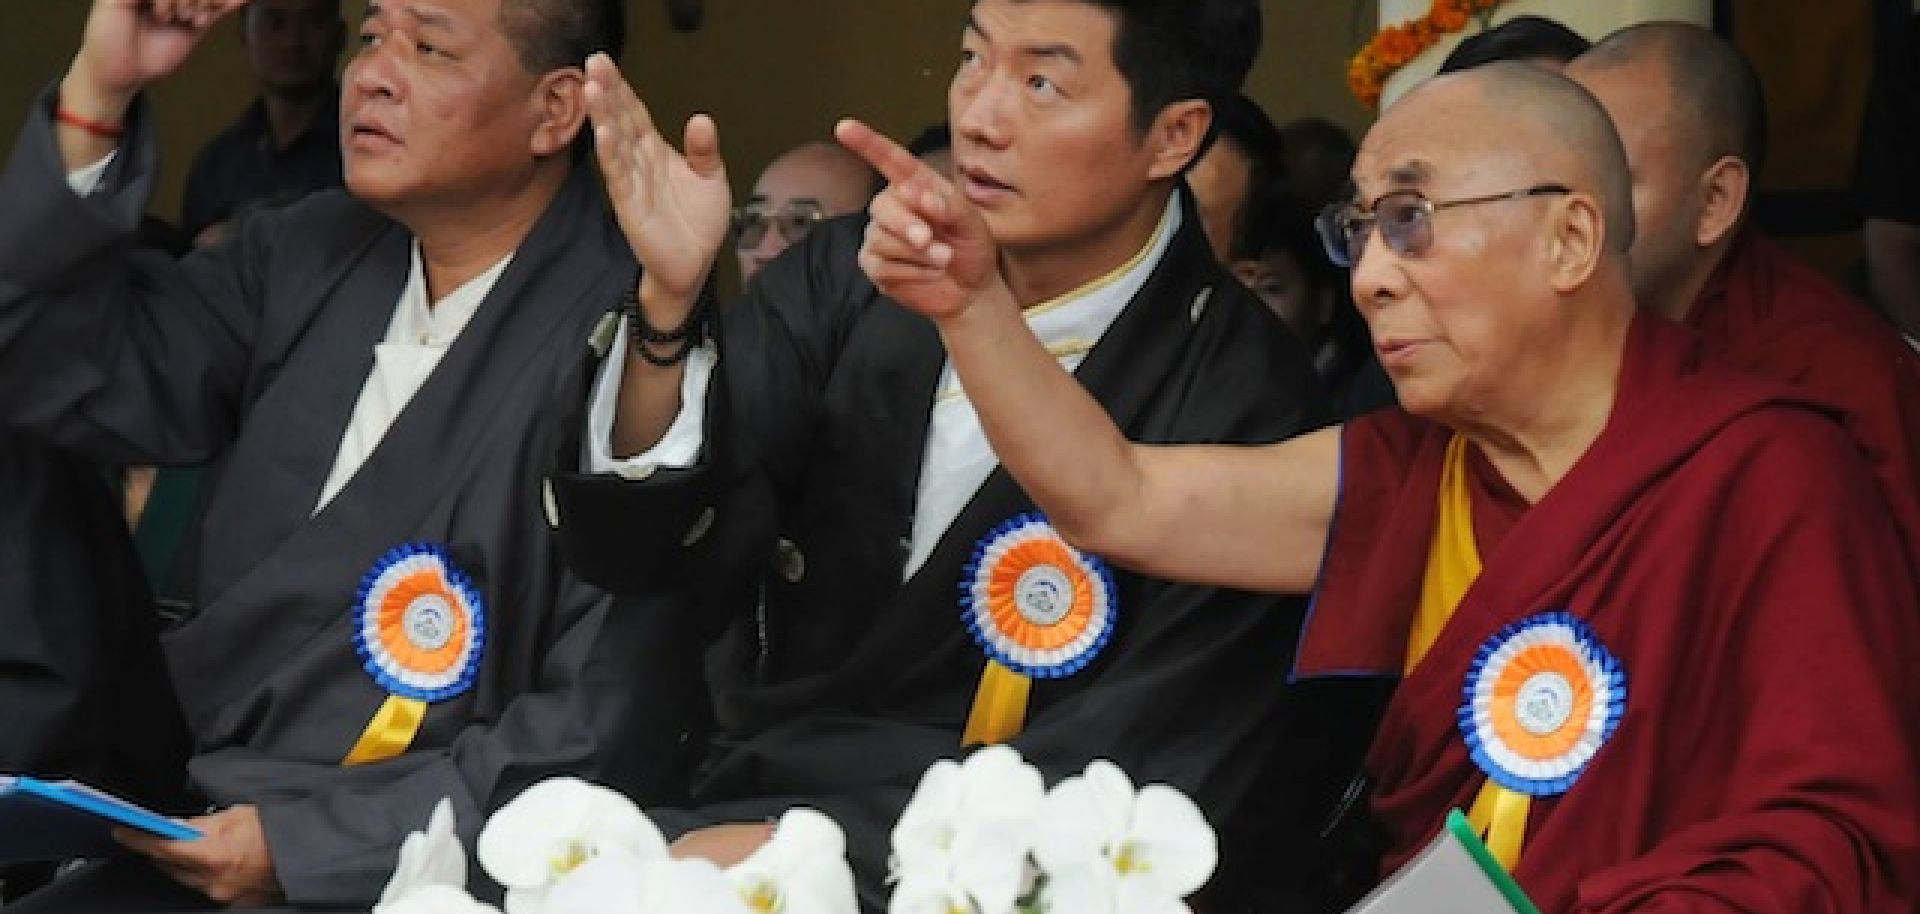 In India, Tibet's Government-in-Exile Reconsiders its Goals